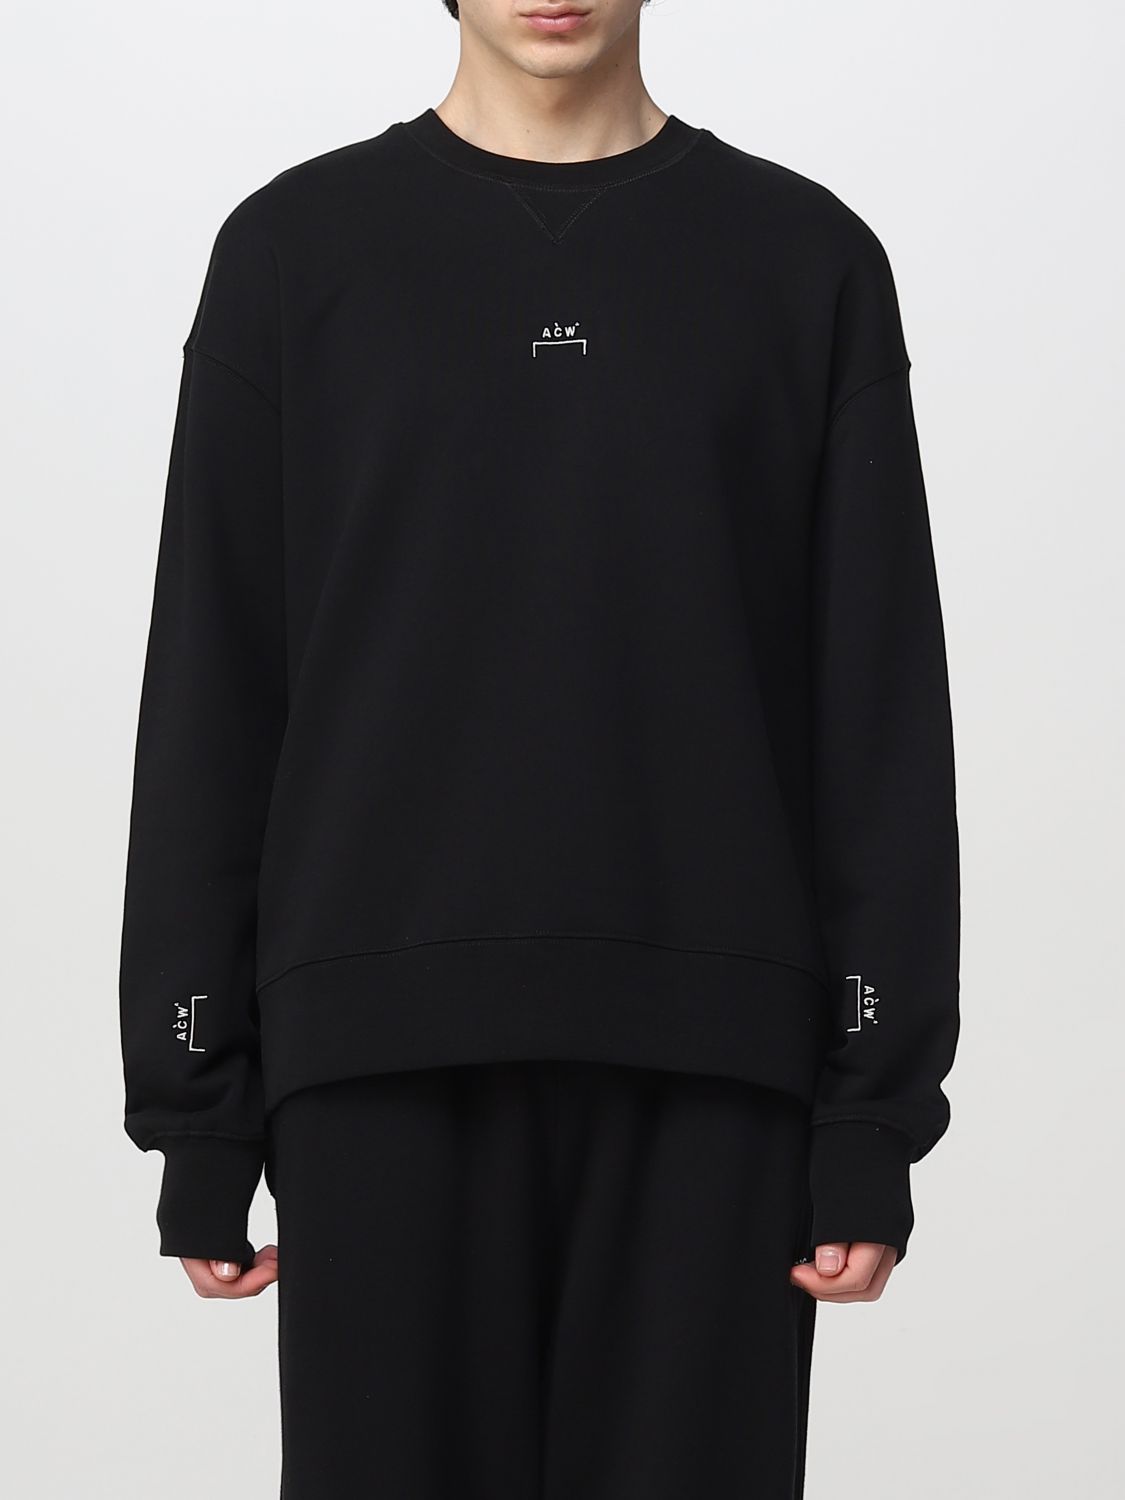 A-COLD-WALL*: sweater for man - Black | A-Cold-Wall* sweater MW080 ...